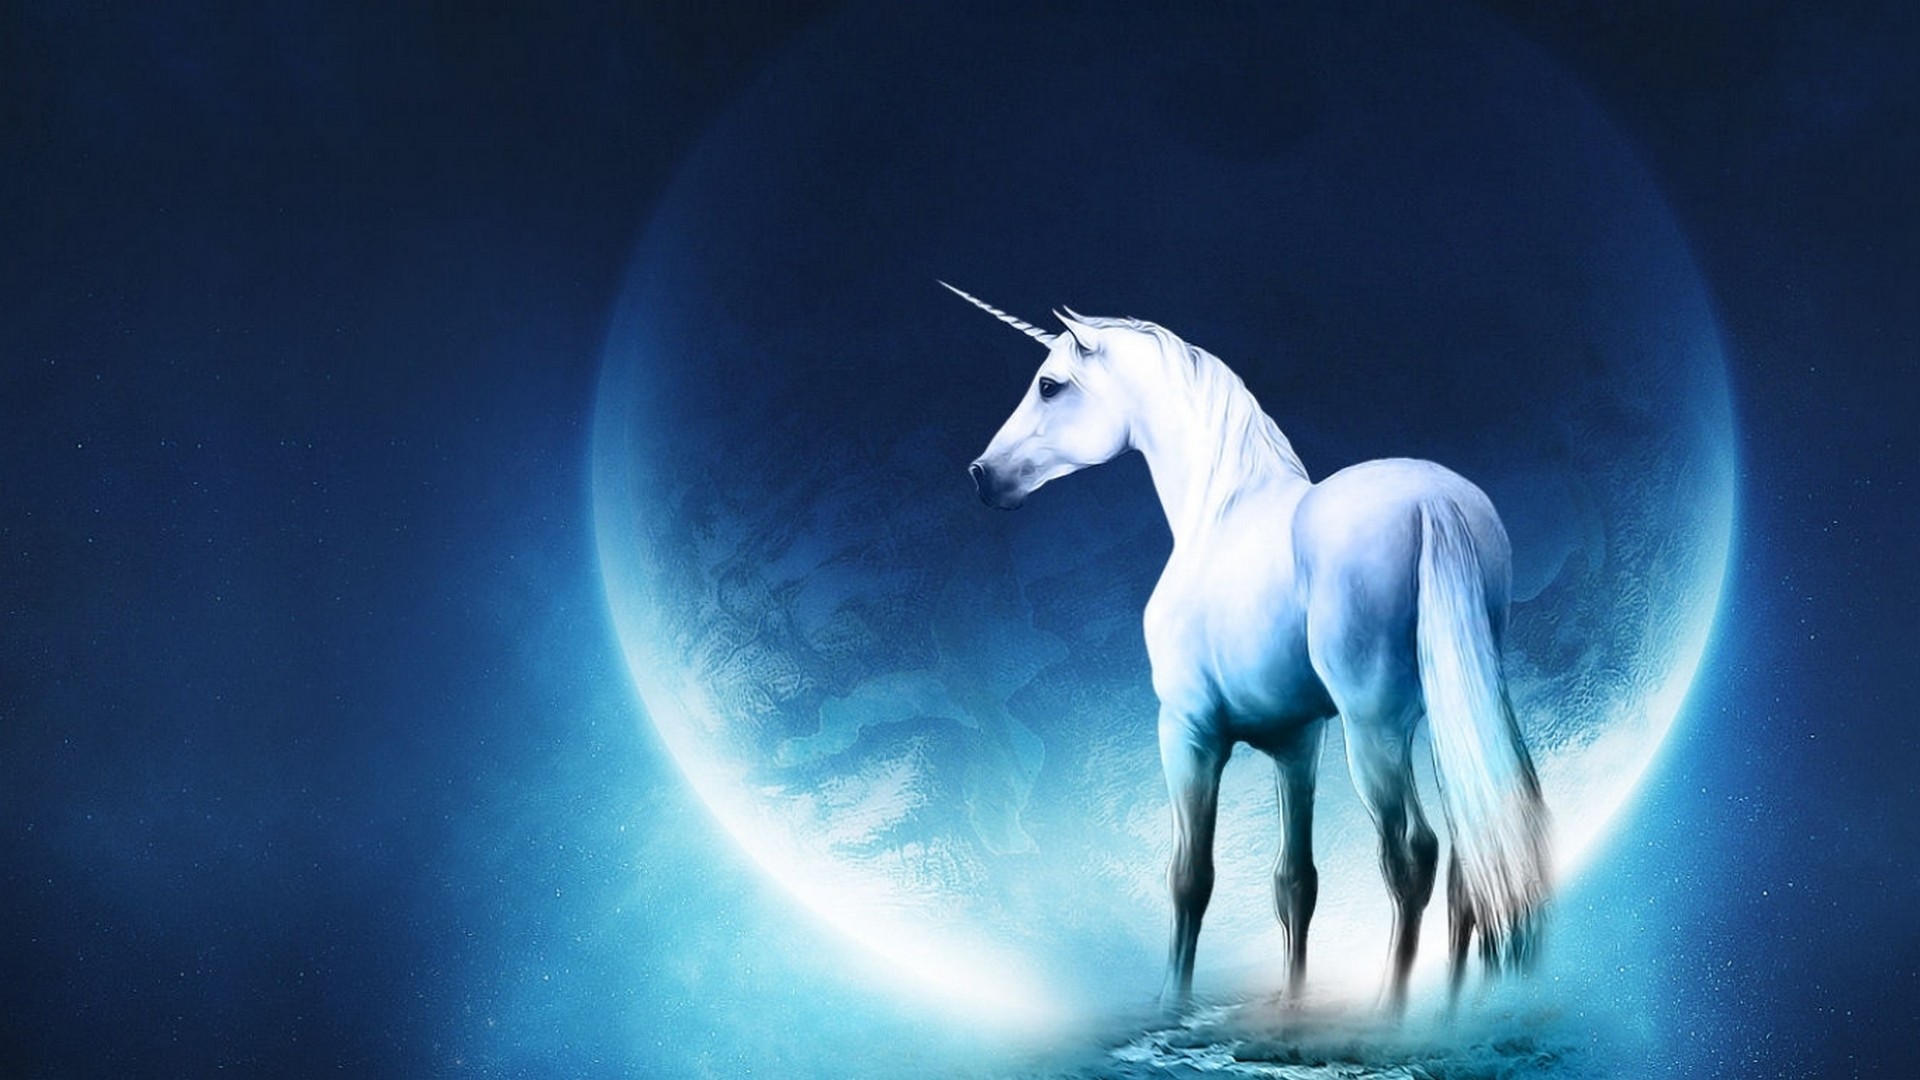 Wallpaper Unicorn With high-resolution 1920X1080 pixel. You can use this wallpaper for your Windows and Mac OS computers as well as your Android and iPhone smartphones